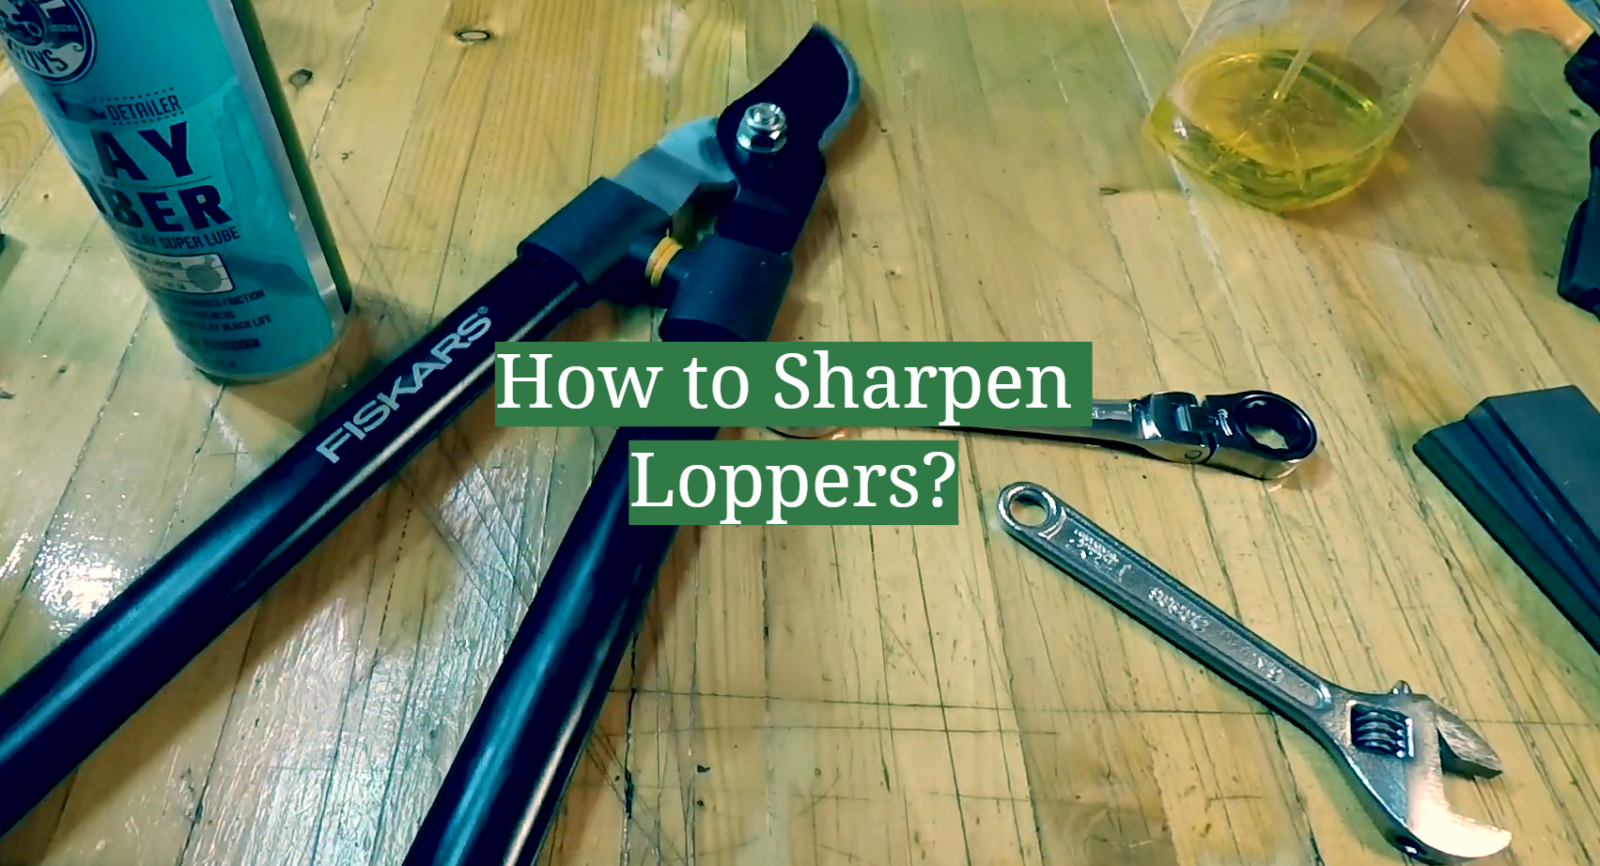 How to Sharpen Loppers?